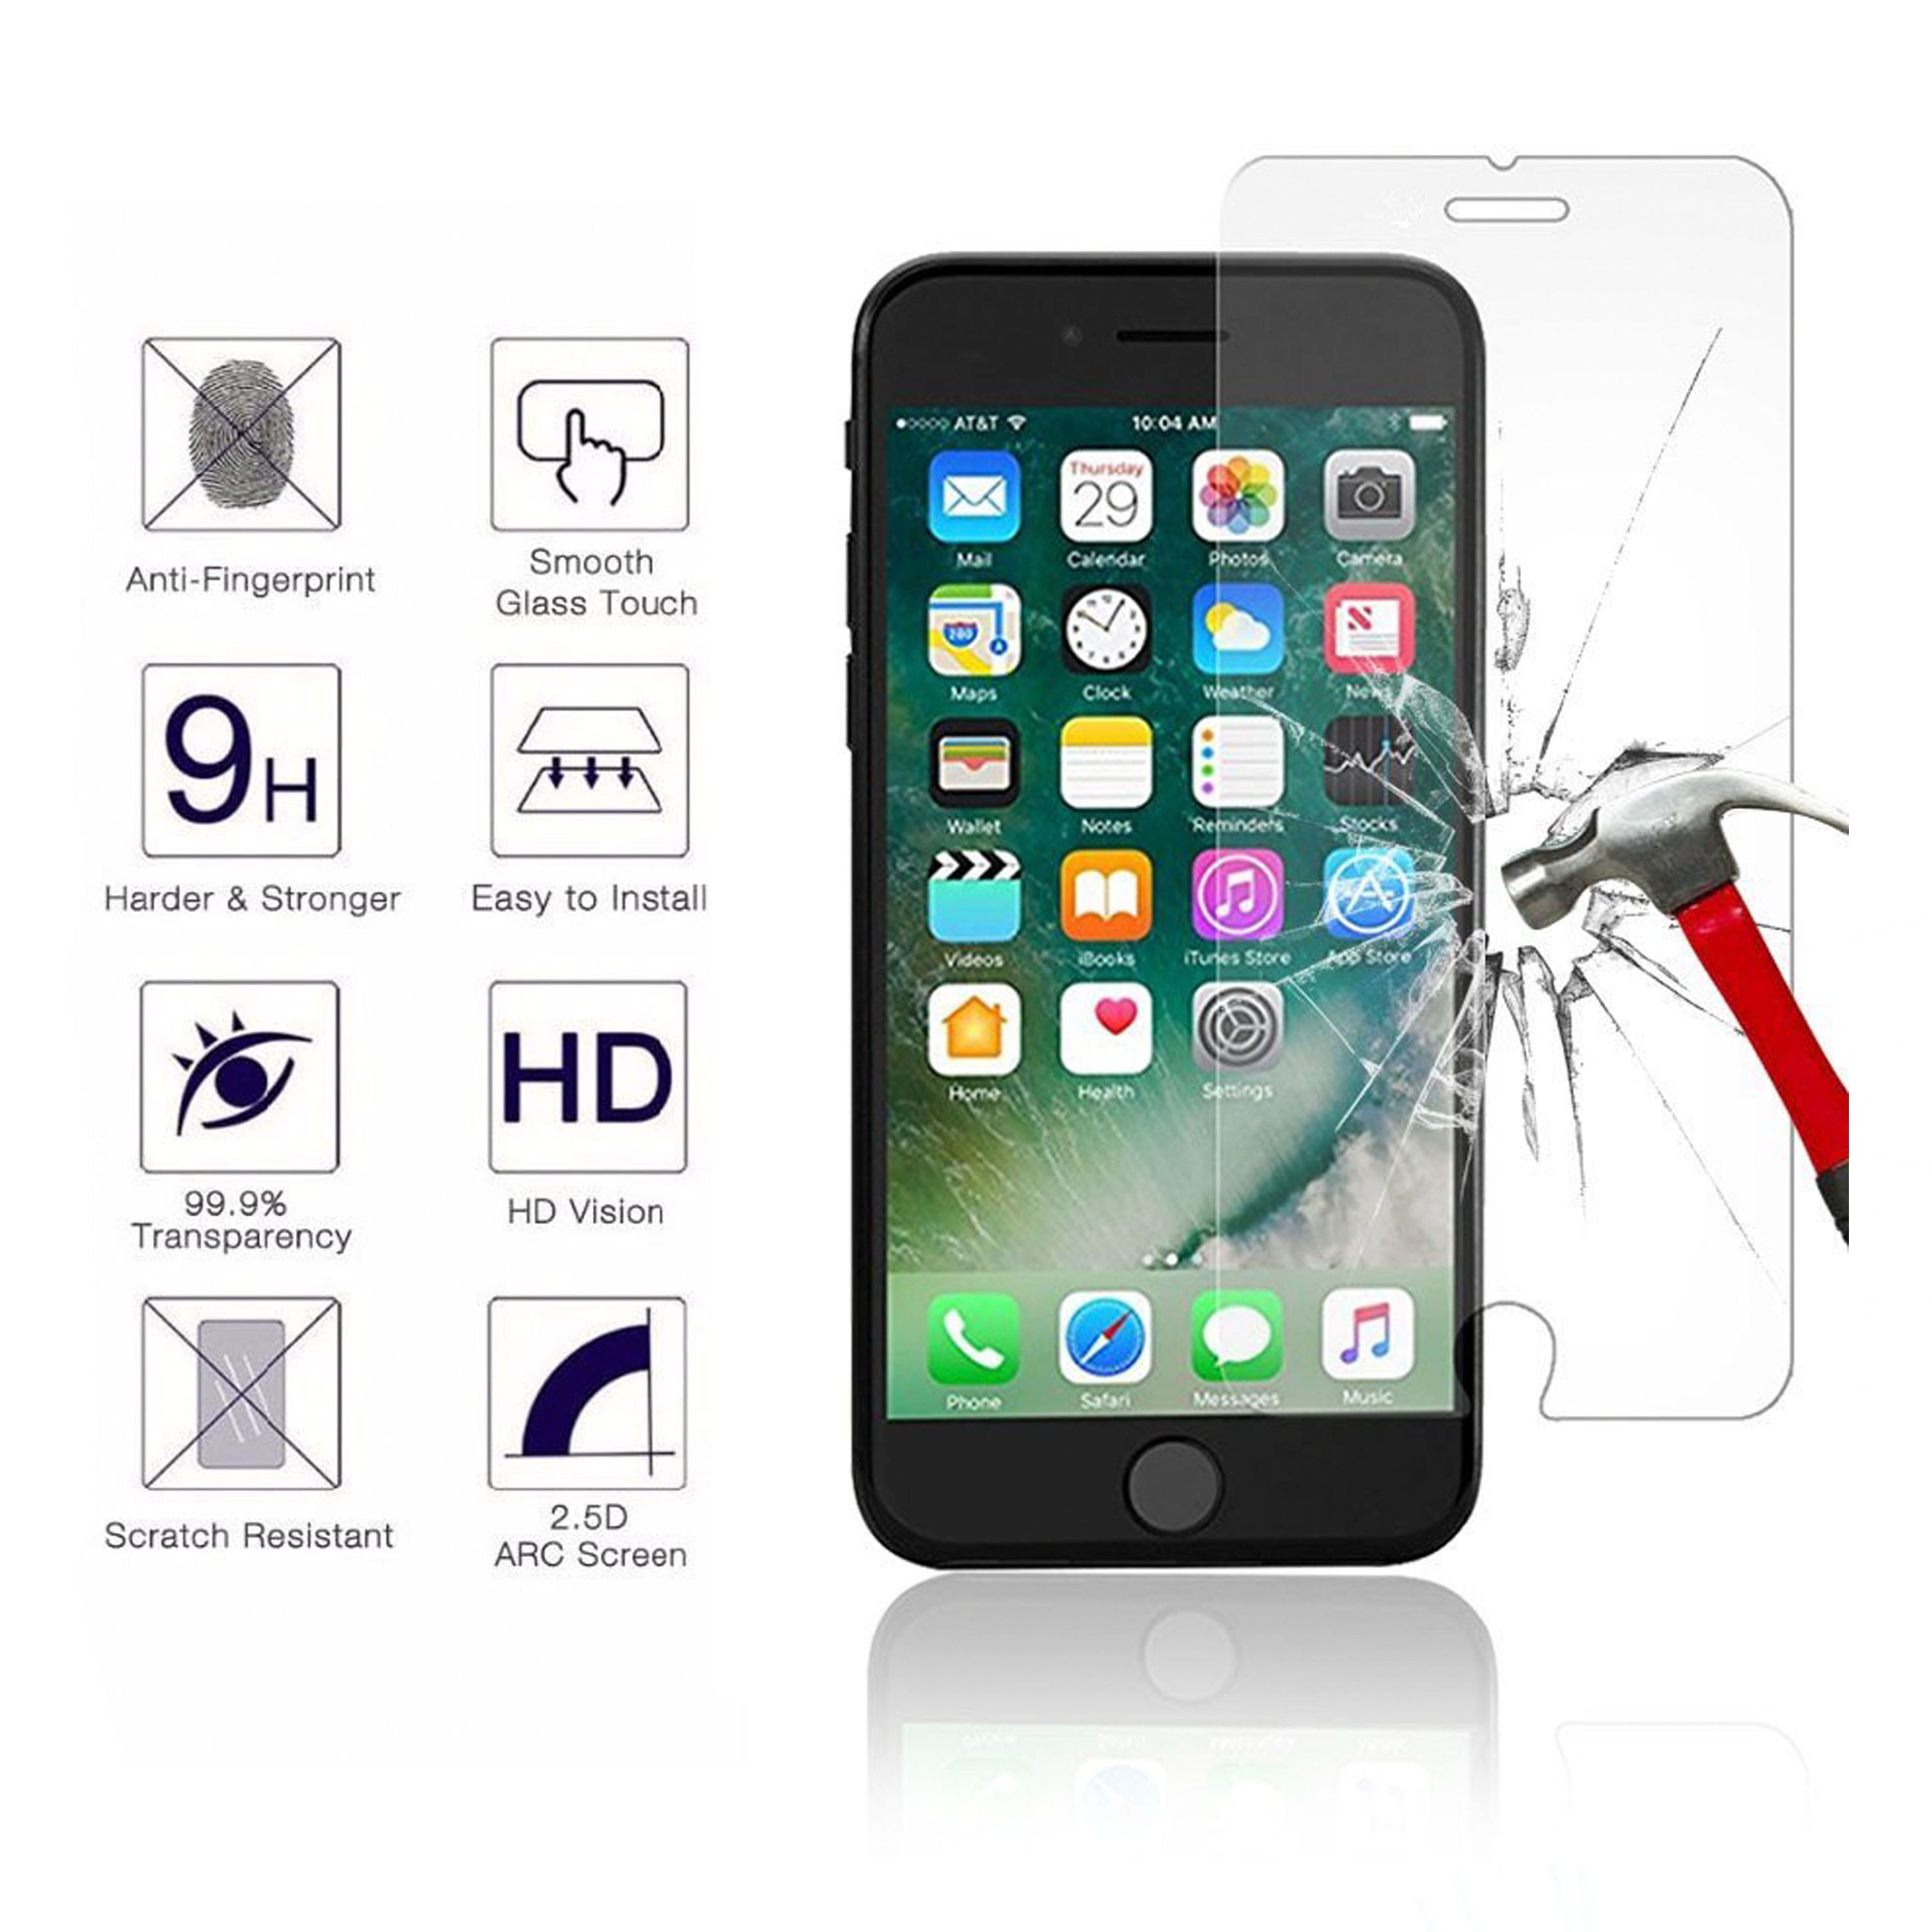 Tempered Glass with Accurate Touch and Anti-Scratch and Anti-Smudge Glass Screen Protector for iPhone 6/7/8 Plus or iPhone 6s/7s/8s Plus 3 Pack Easy Installation & Fits Most Cases